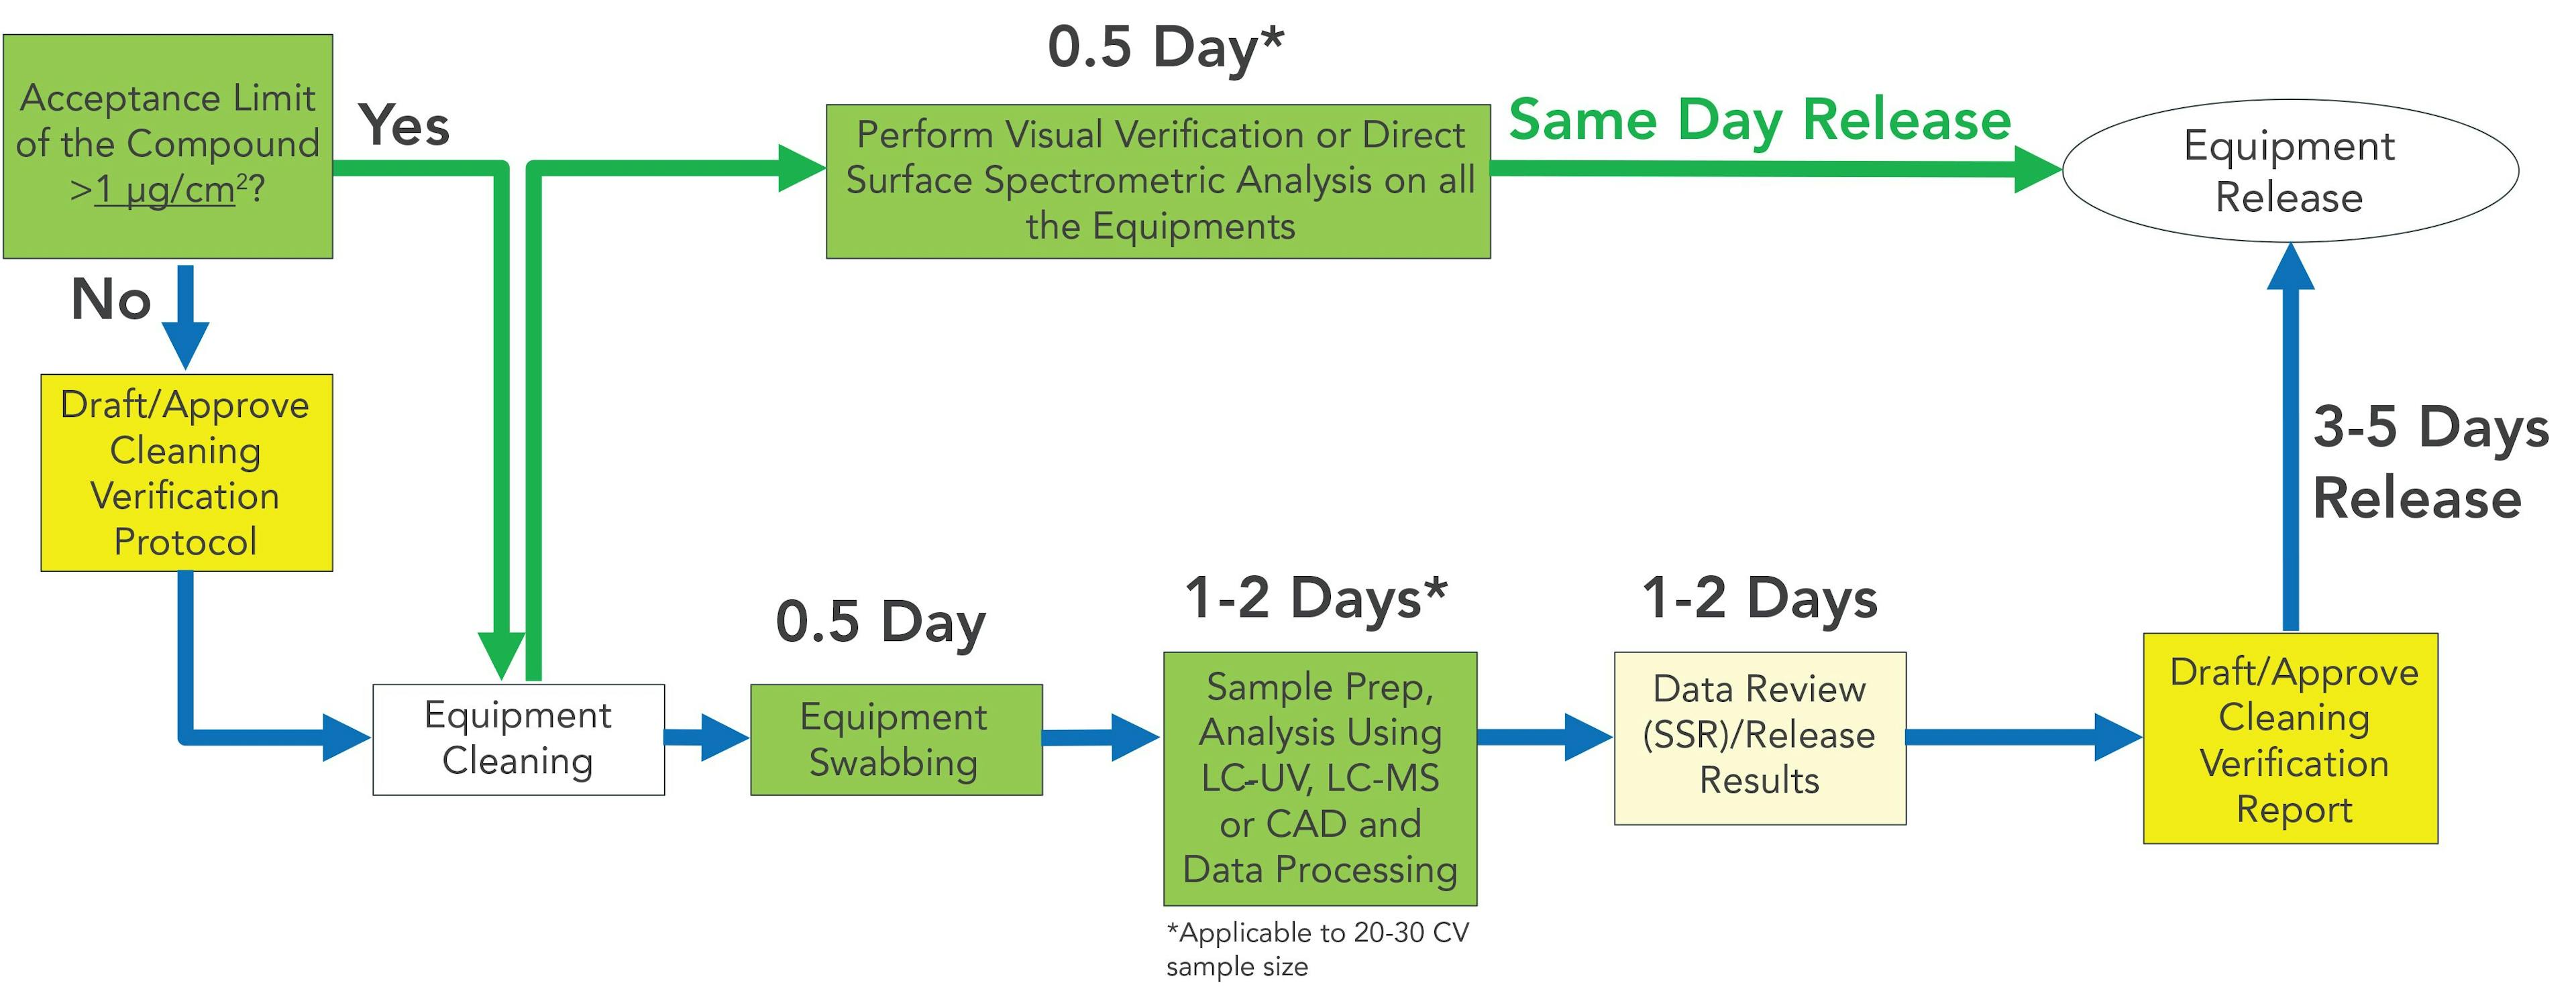 FIGURE 3: Overall CV workflow in a pharmaceutical manufacturing setting based on the acceptance limit of the analyte. A decision chart of the CV workflow can be established based on the acceptance limit of the analyte. If the acceptance limit of the analyte is >1 μg/cm2, either visual verification or spectrometric analysis can be applied (green arrows) to increase the throughput and ensure a quick equipment cleaning turnaround. However, if the acceptance limit of the analyte is <1 μg/cm2, conventional CV steps including swabbing, LC–UV/MS/CAD analysis, and data process or review need to be followed (blue arrows). The proposed analysis turnaround is based on 20–30 CV sample size.